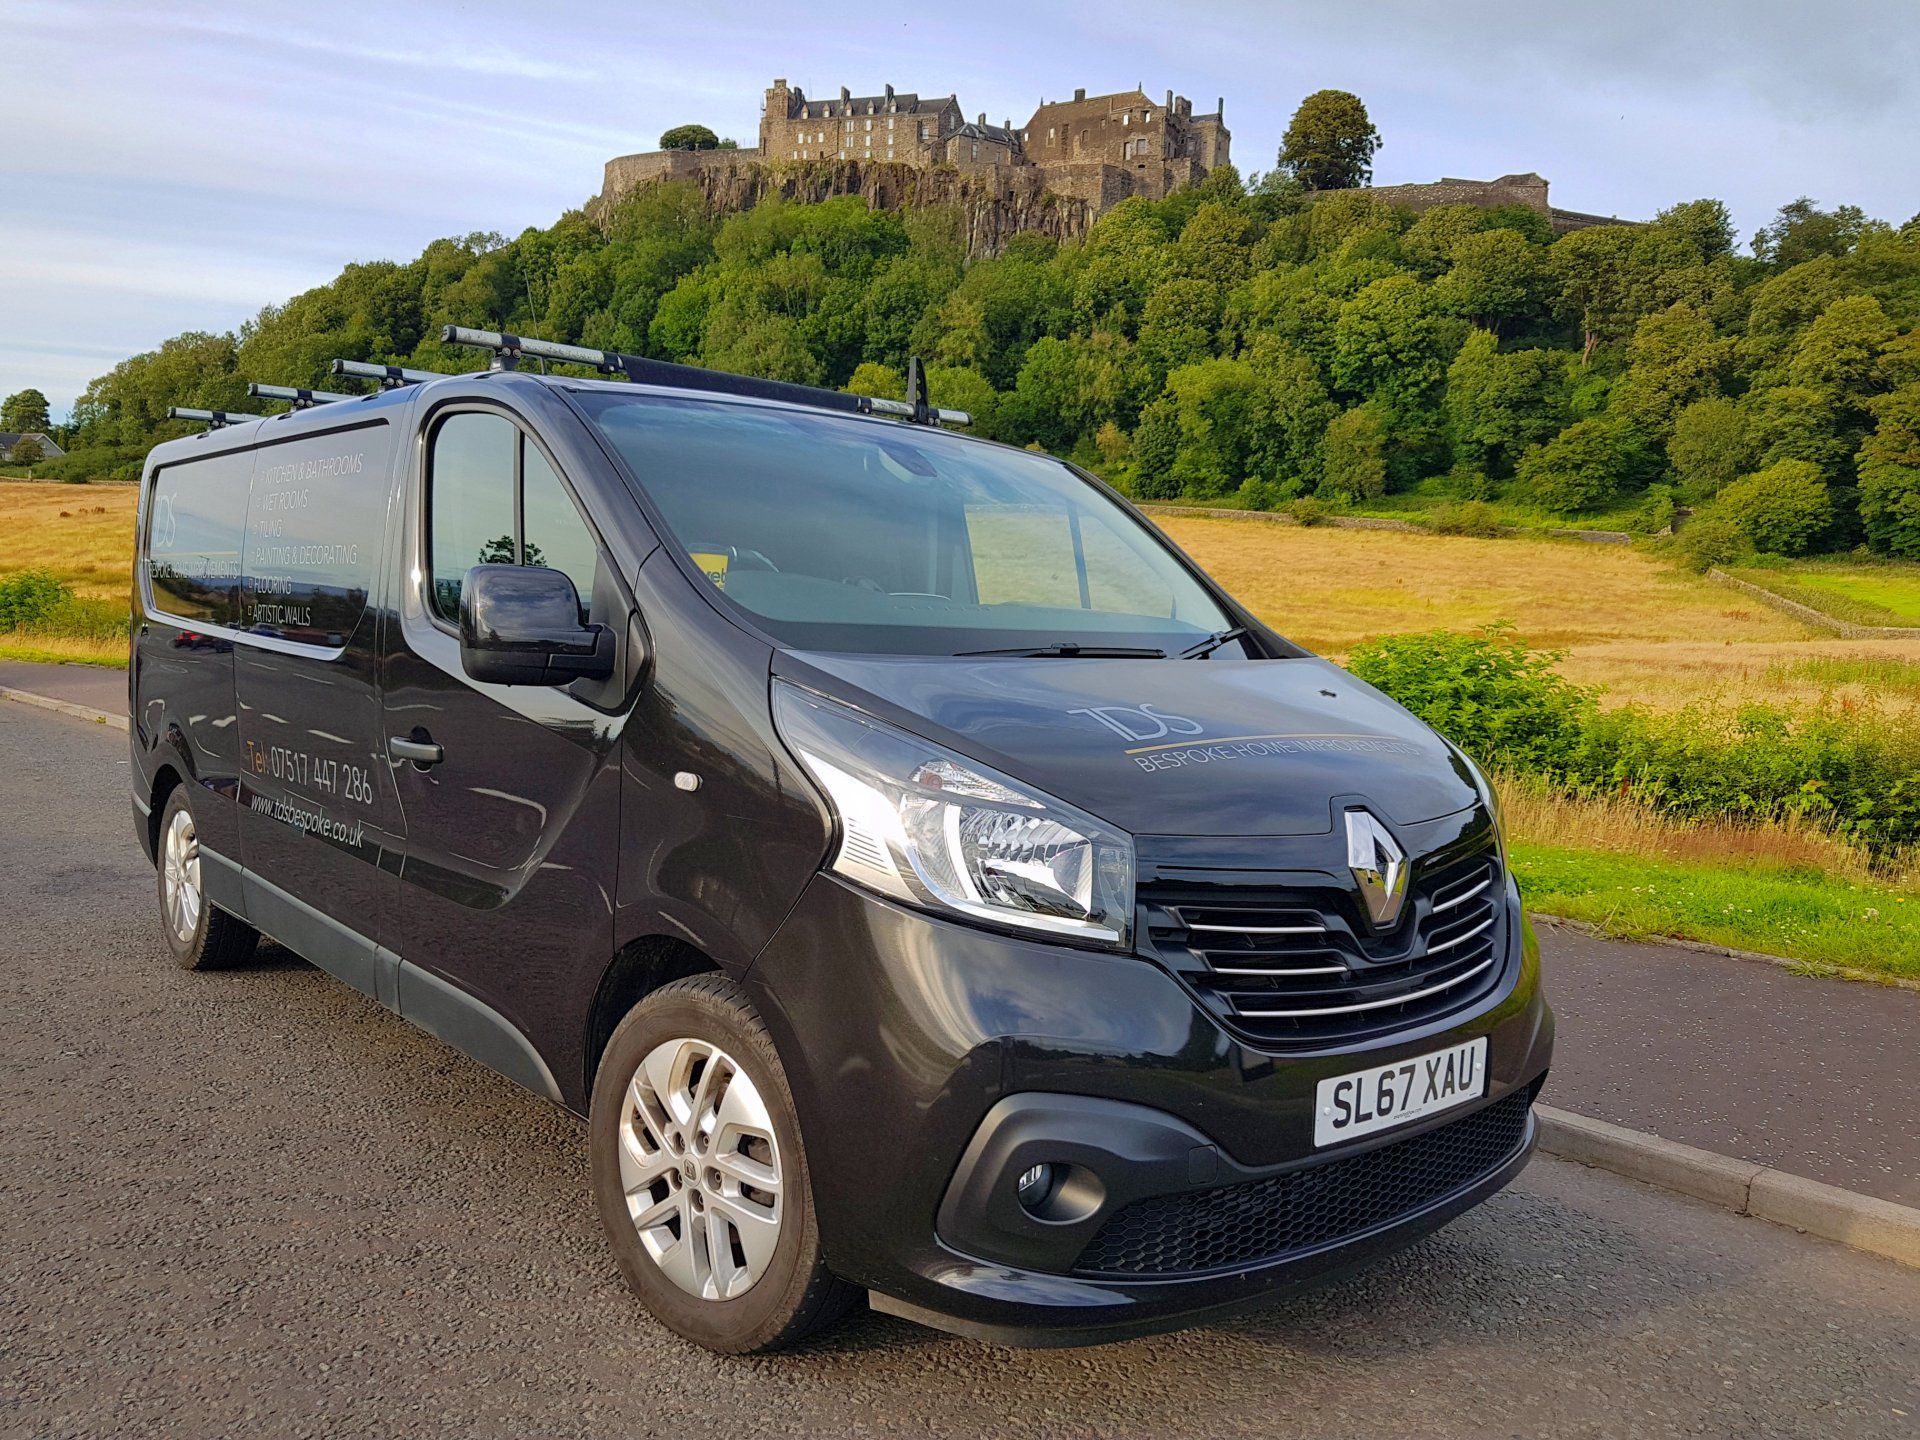 A grey-brown van is parked on the side of the road in front of the Stirling Castle.